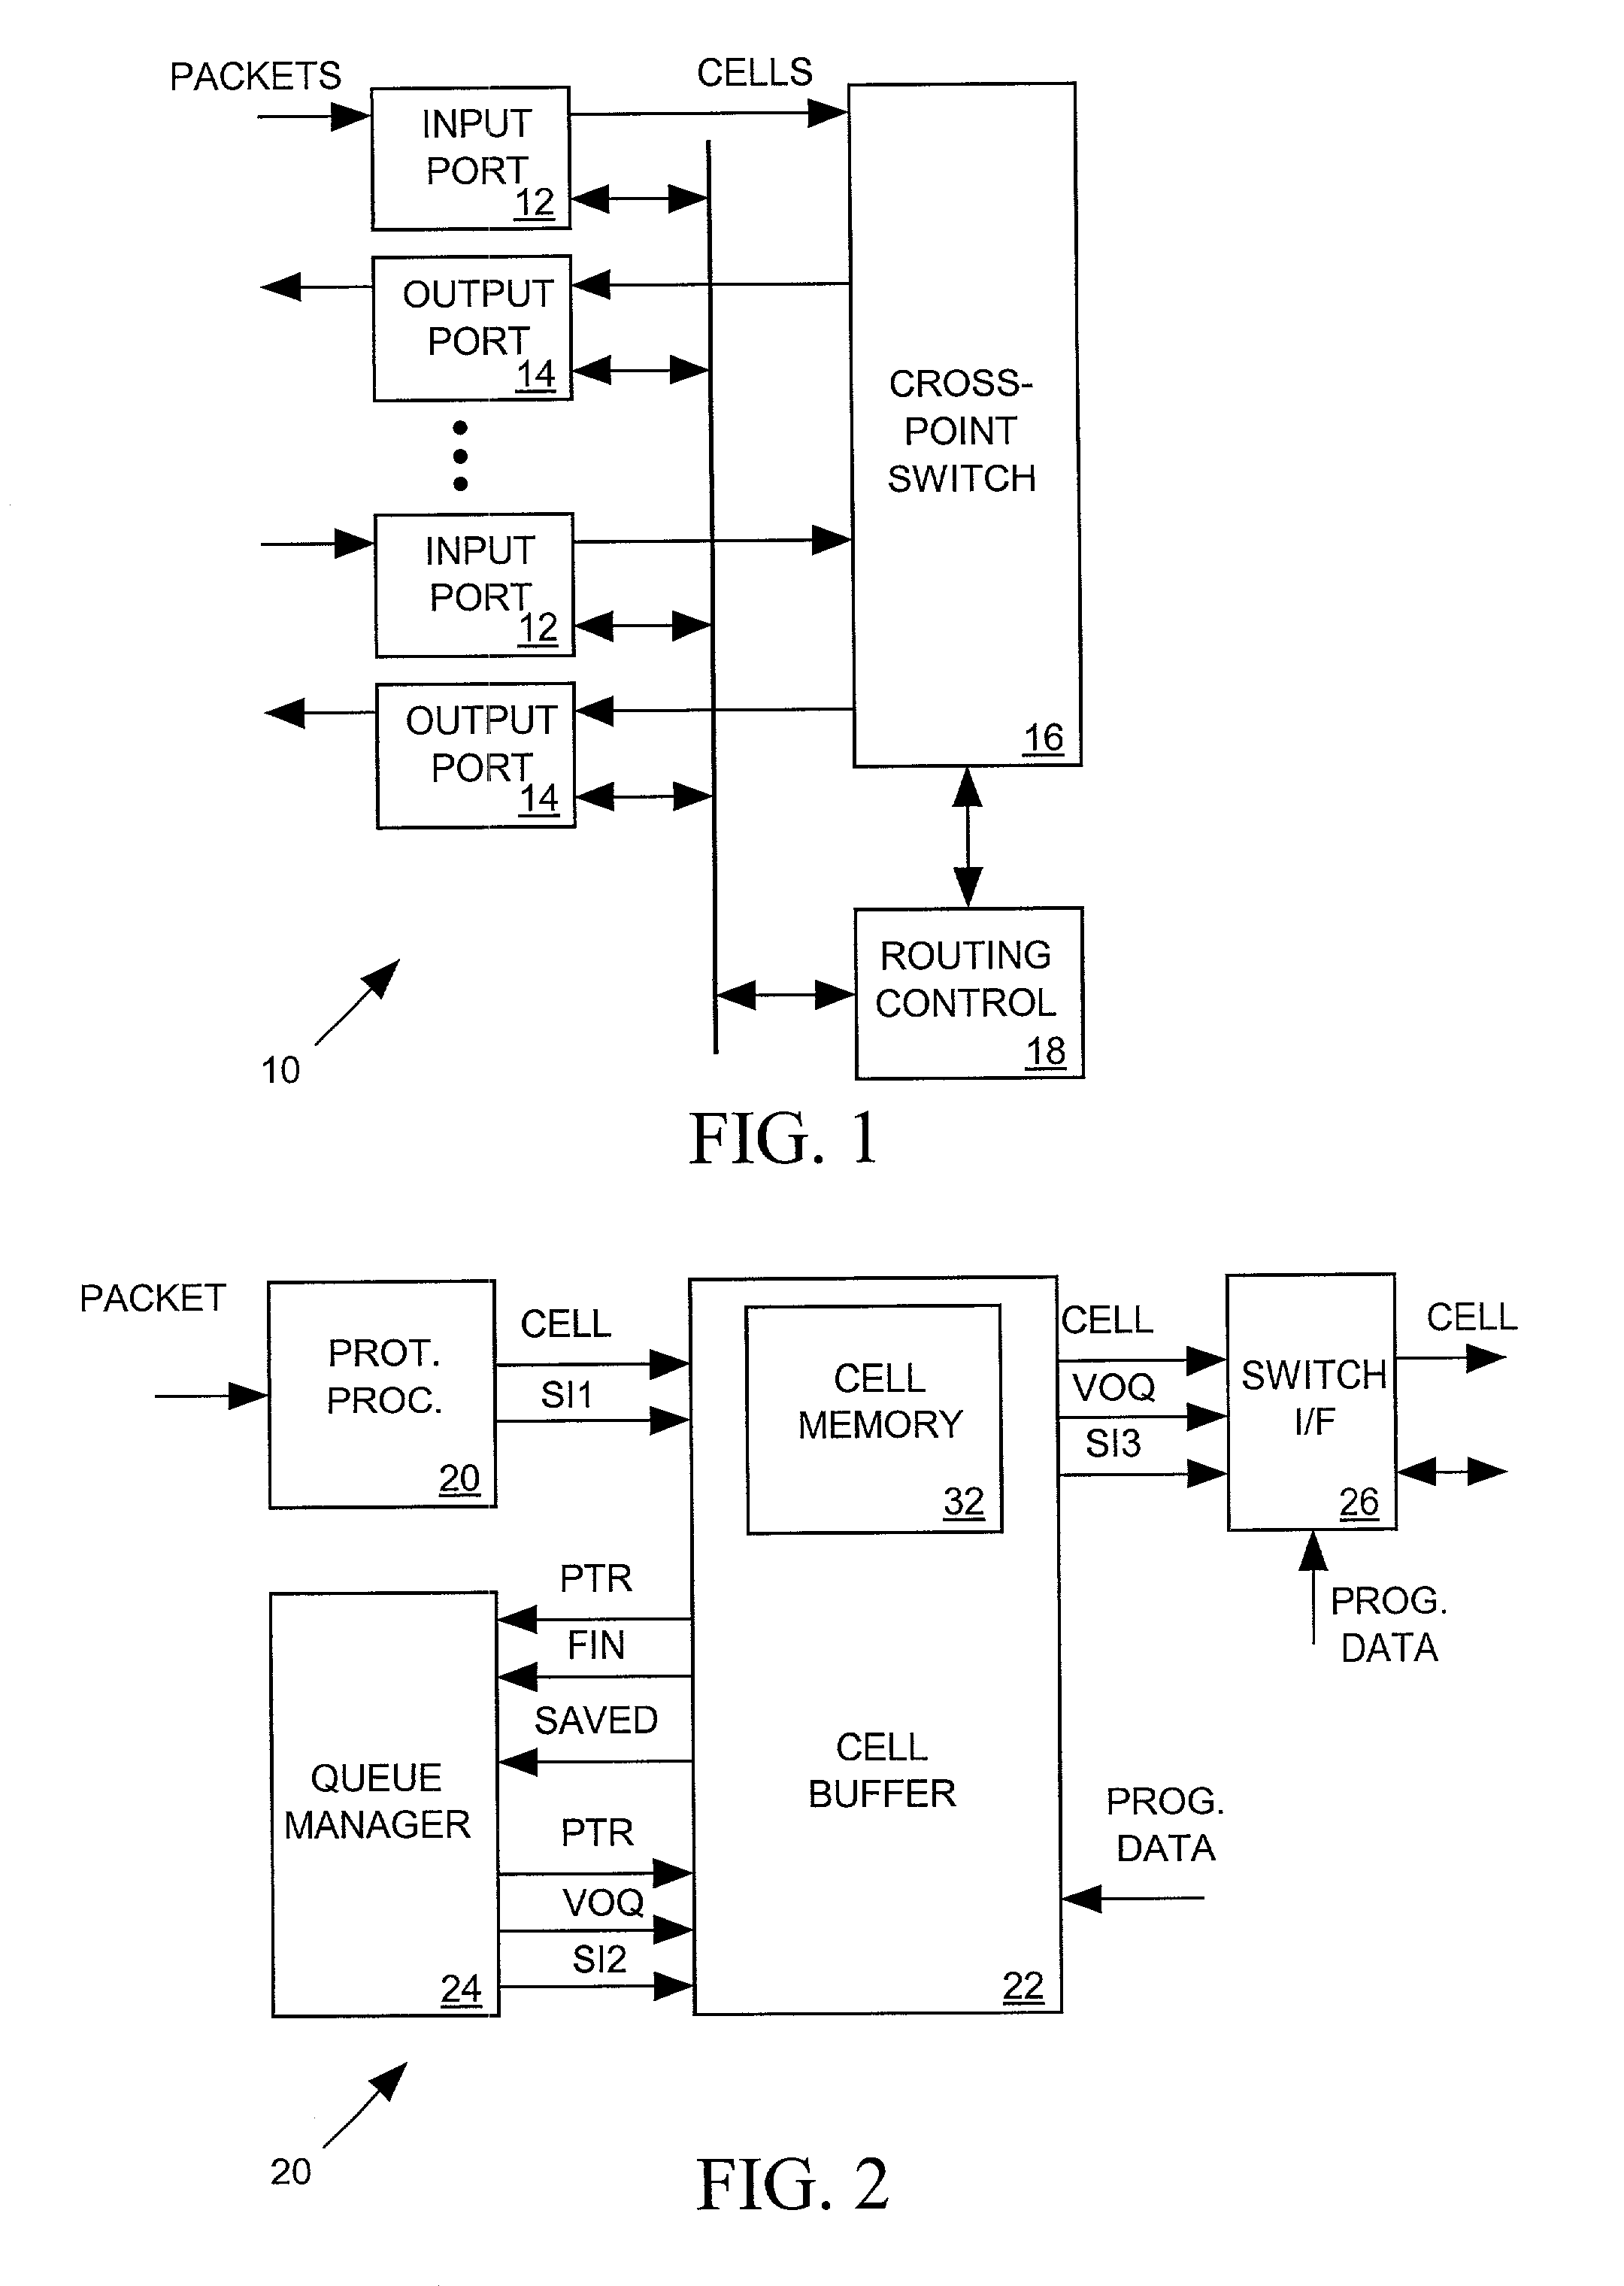 Multicast cell buffer for network switch